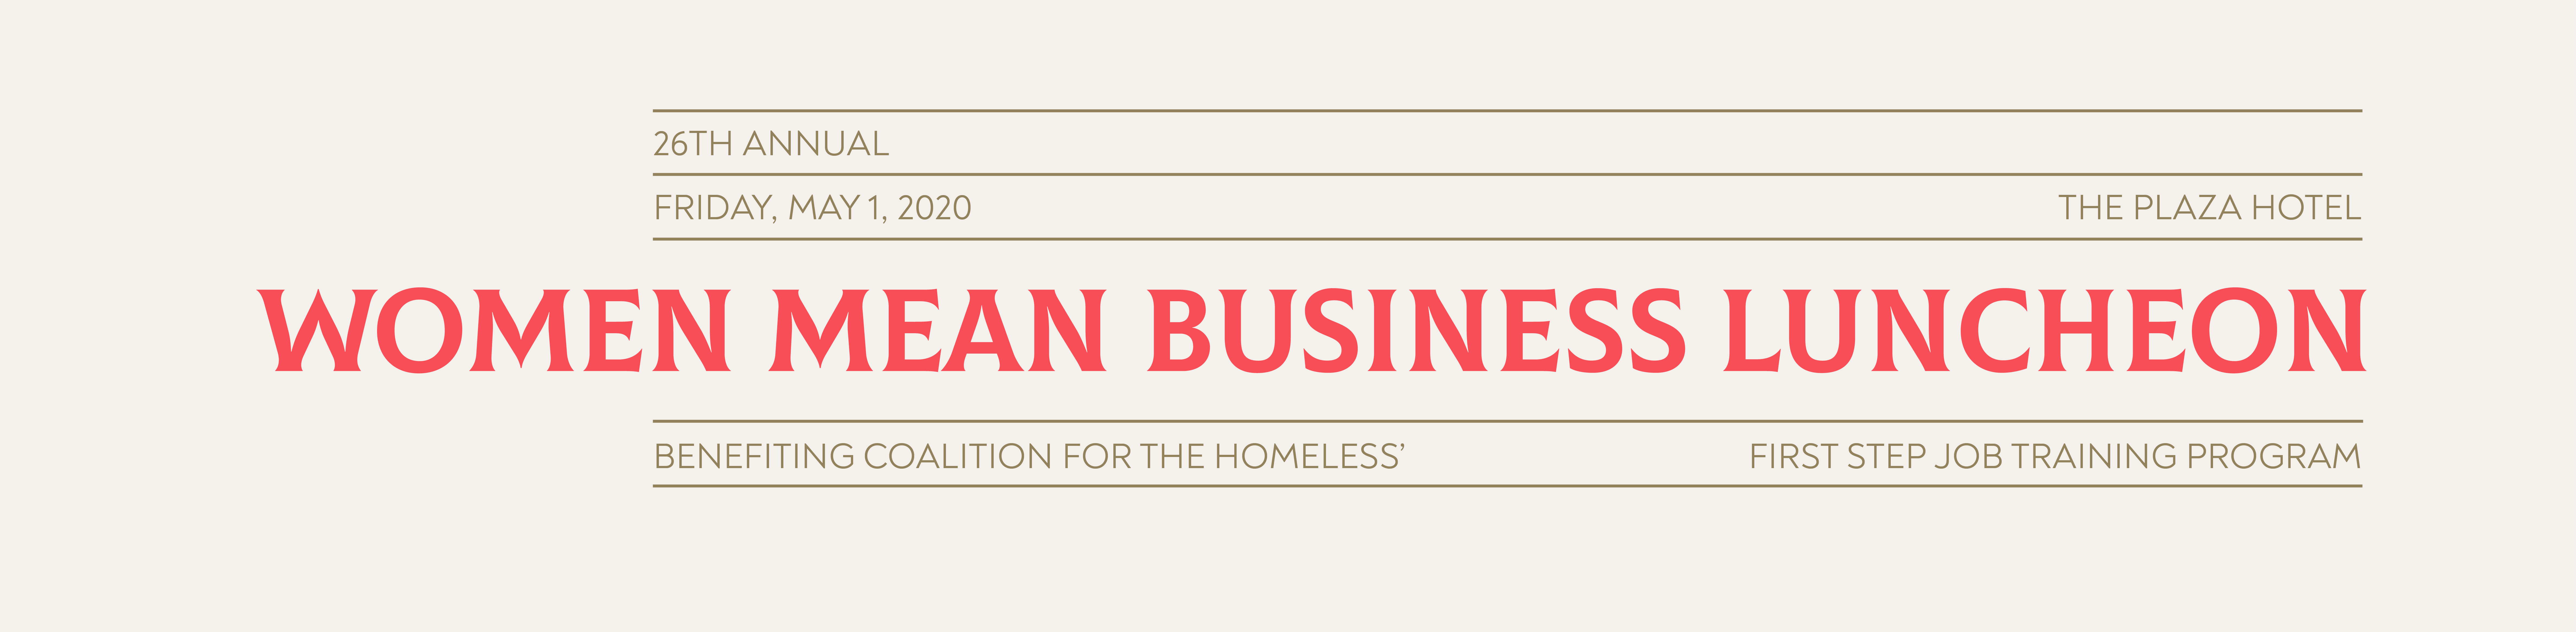 GRAPHIC: 26th Annual Women Mean Business Luncheon is May 1, 2020. Benefiting the Coalition for the Homeless' First Step Job Training Program